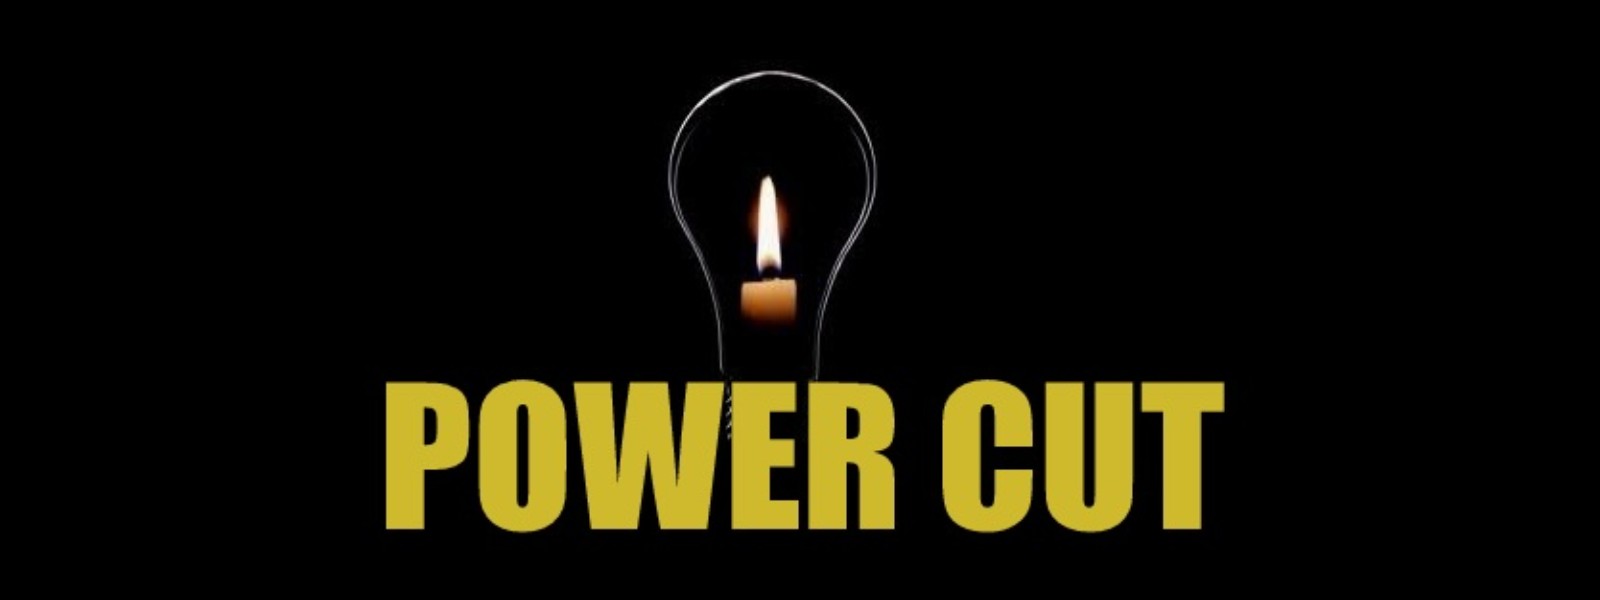 Power Outage experienced across many areas